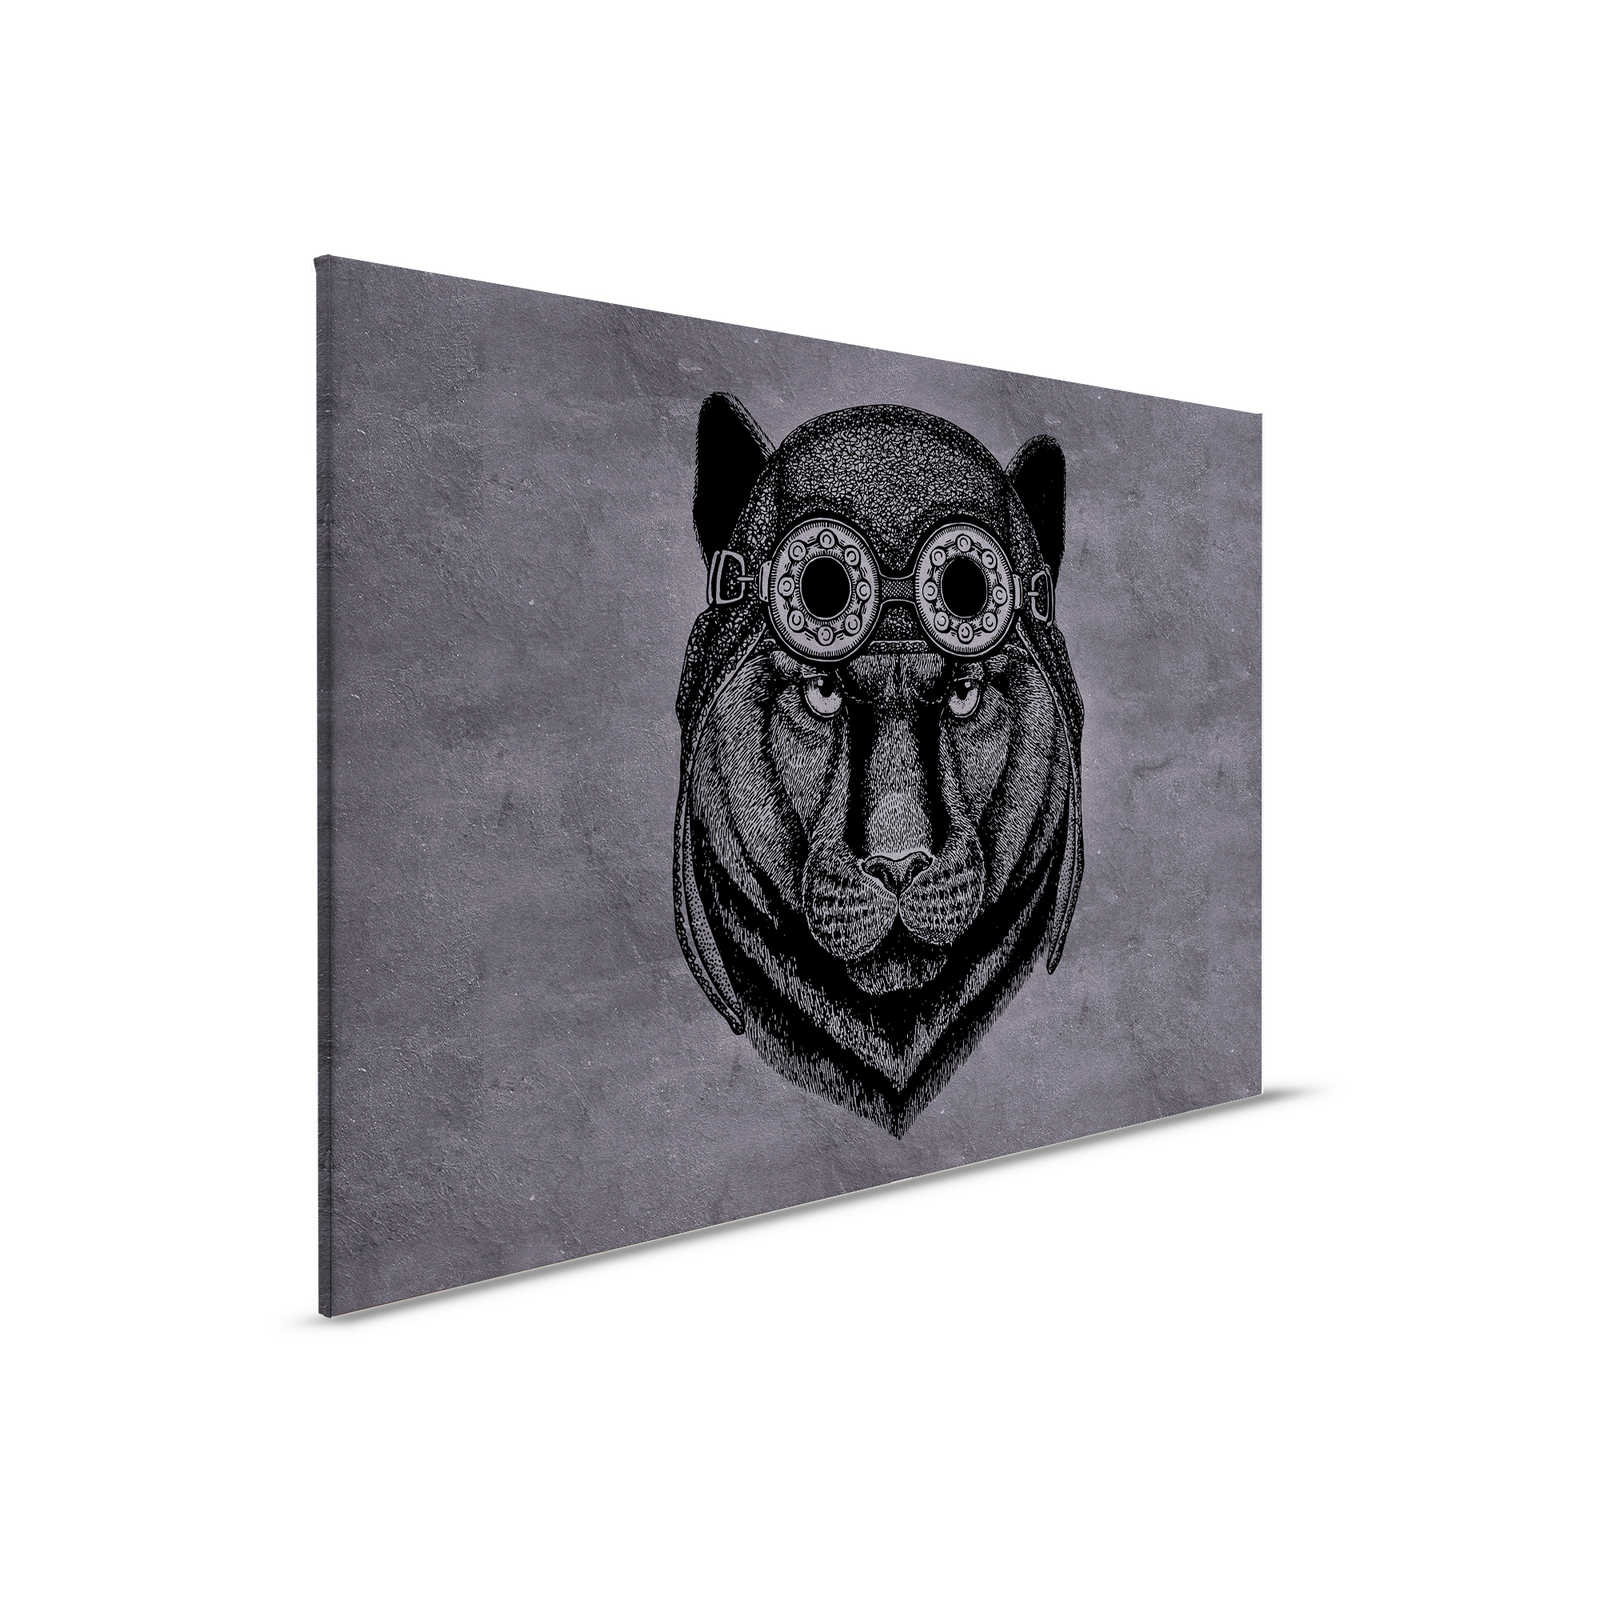         Black Canvas Painting Panther with Aviator Cap - 0.90 m x 0.60 m
    